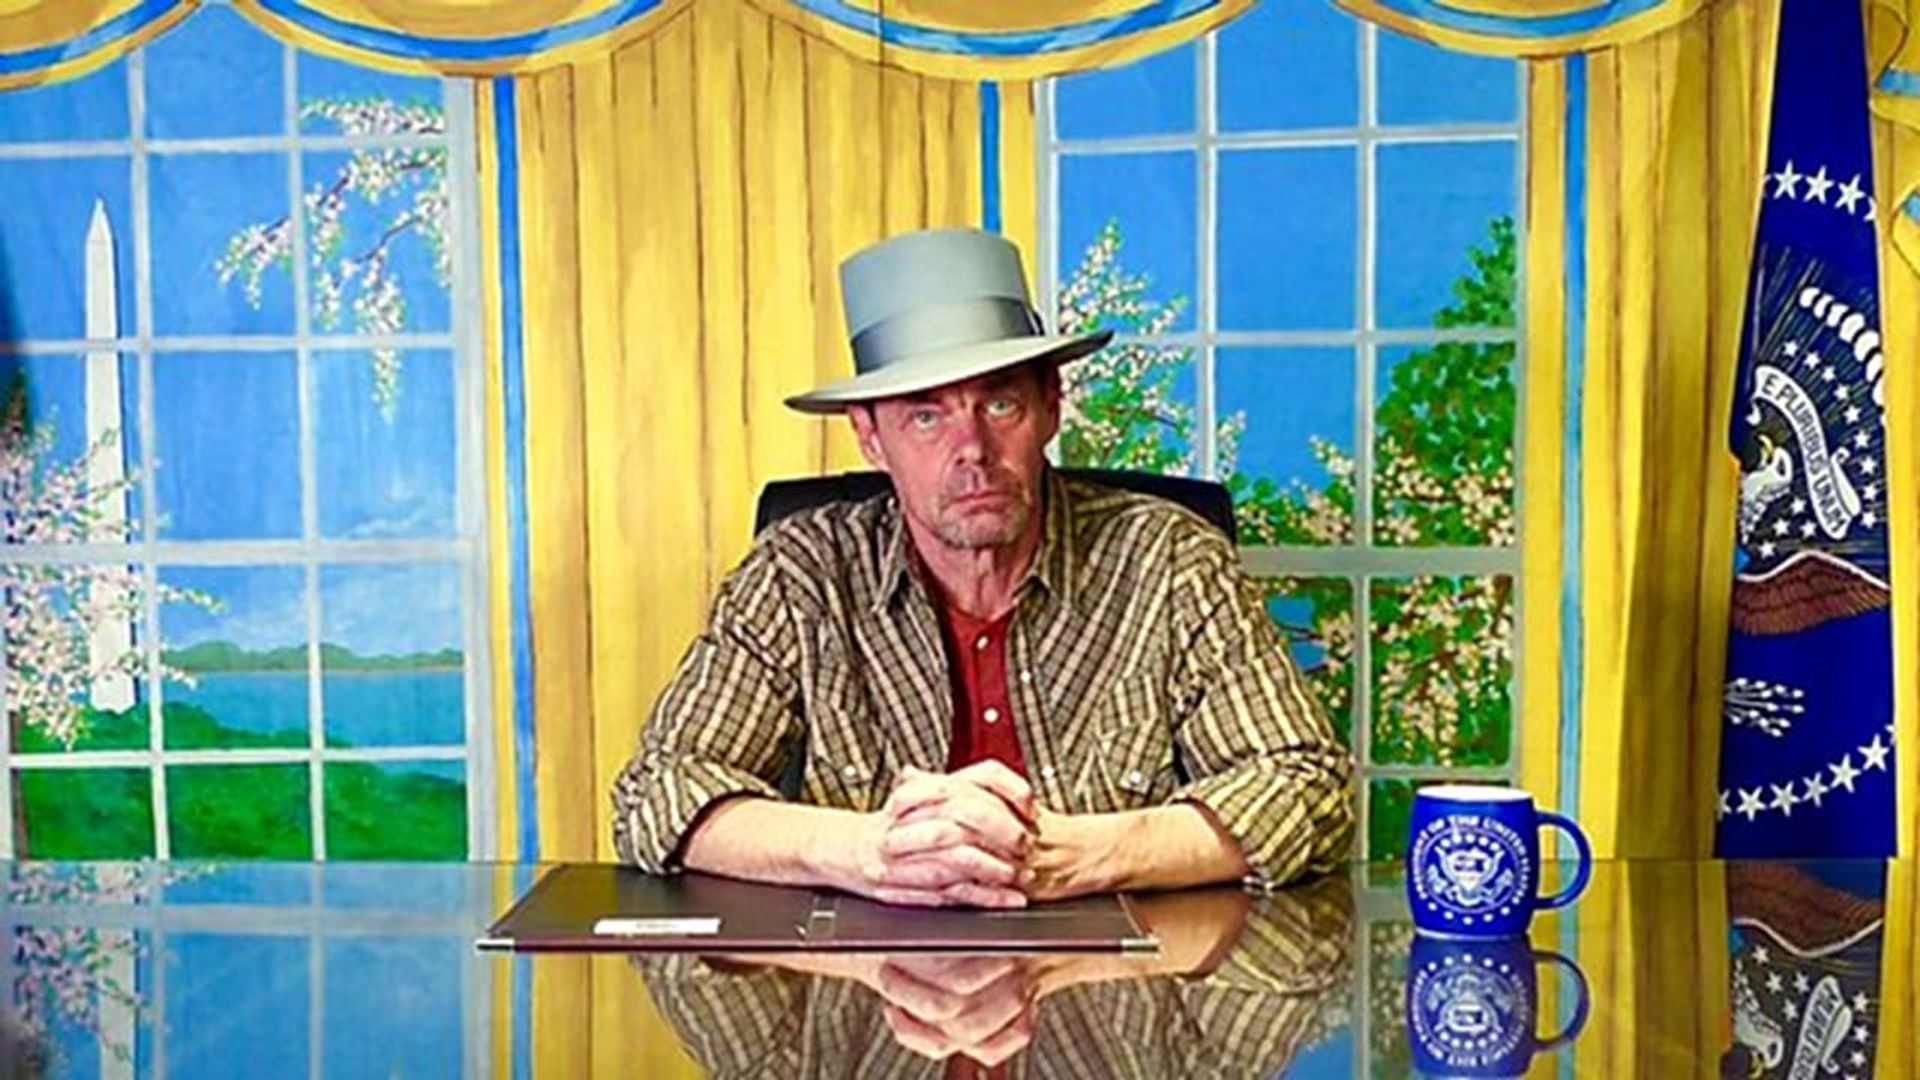 Rich Hall's Presidential Grudge Match background